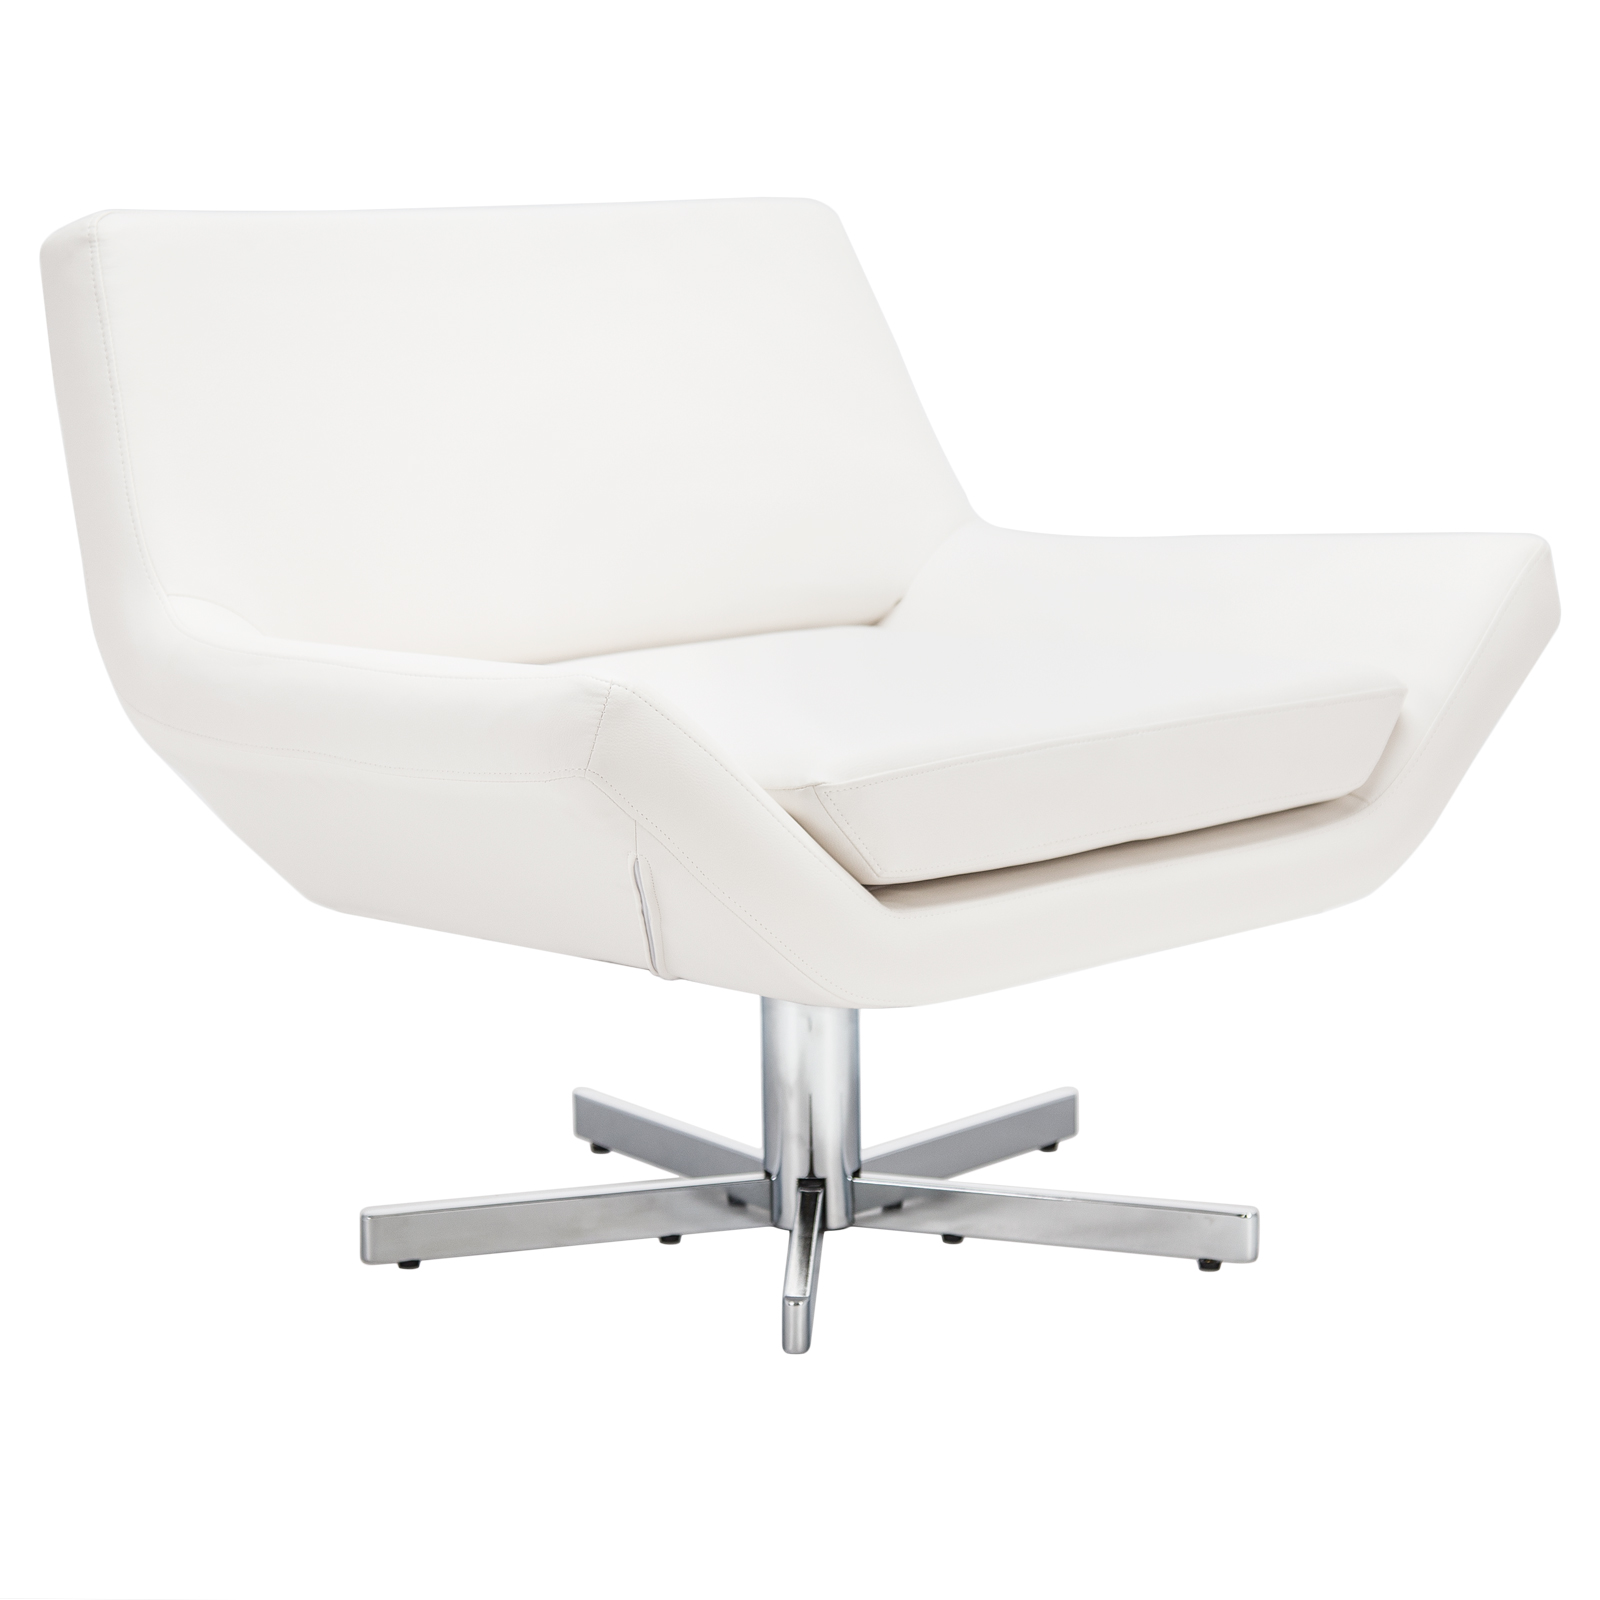 White Lounge Chair Rentals Event Furniture Rental Delivery